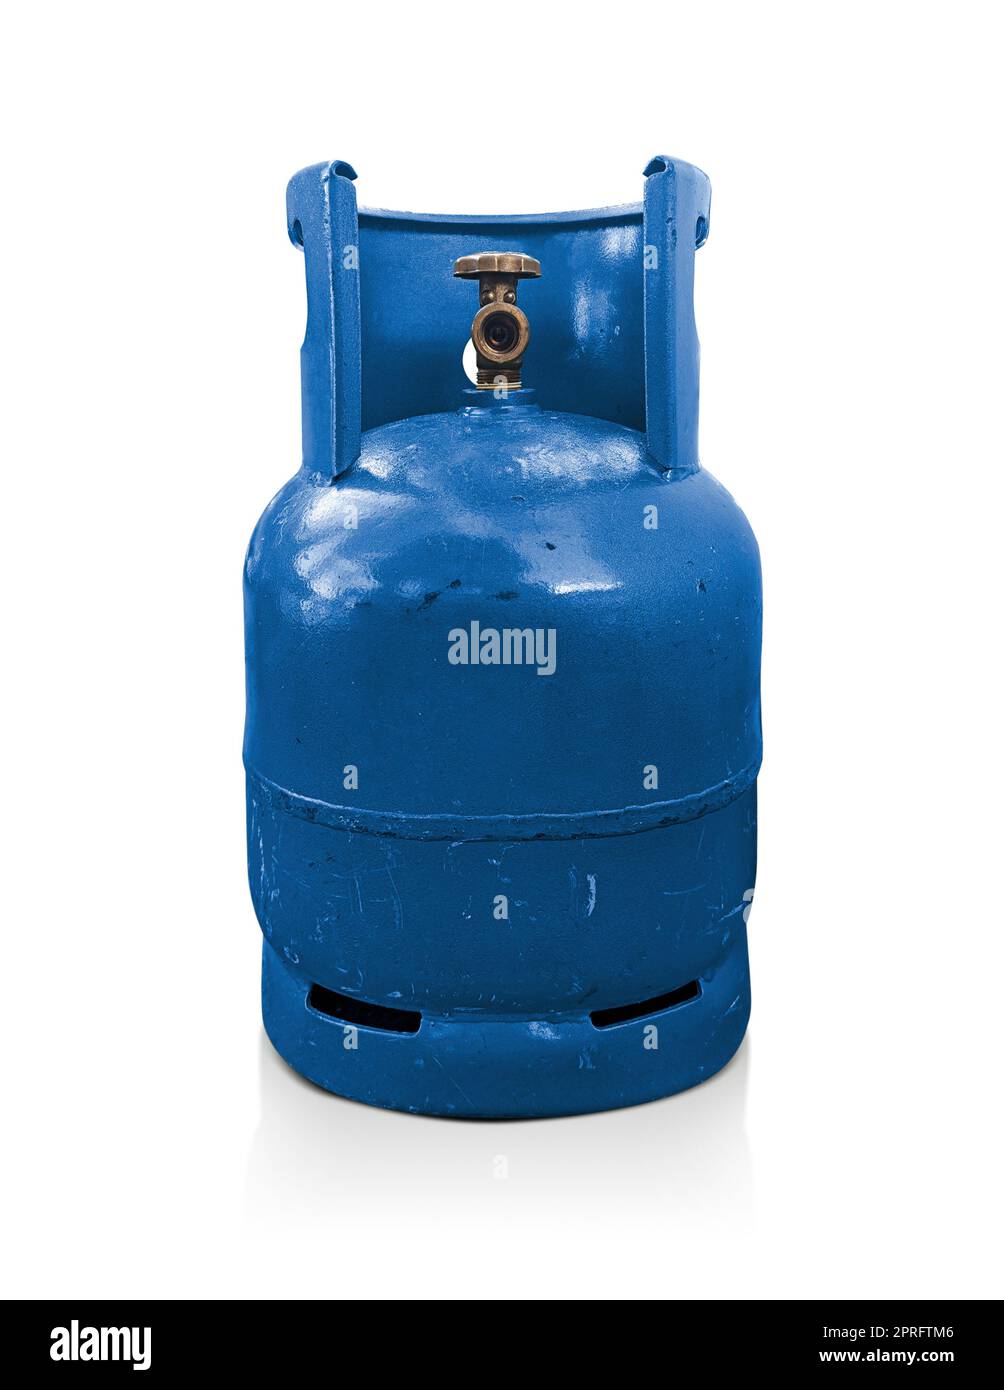 Blue Grungy Liquefied Petroleum Gas (LPG) Cylinder On A White Background  Stock Photo - Alamy